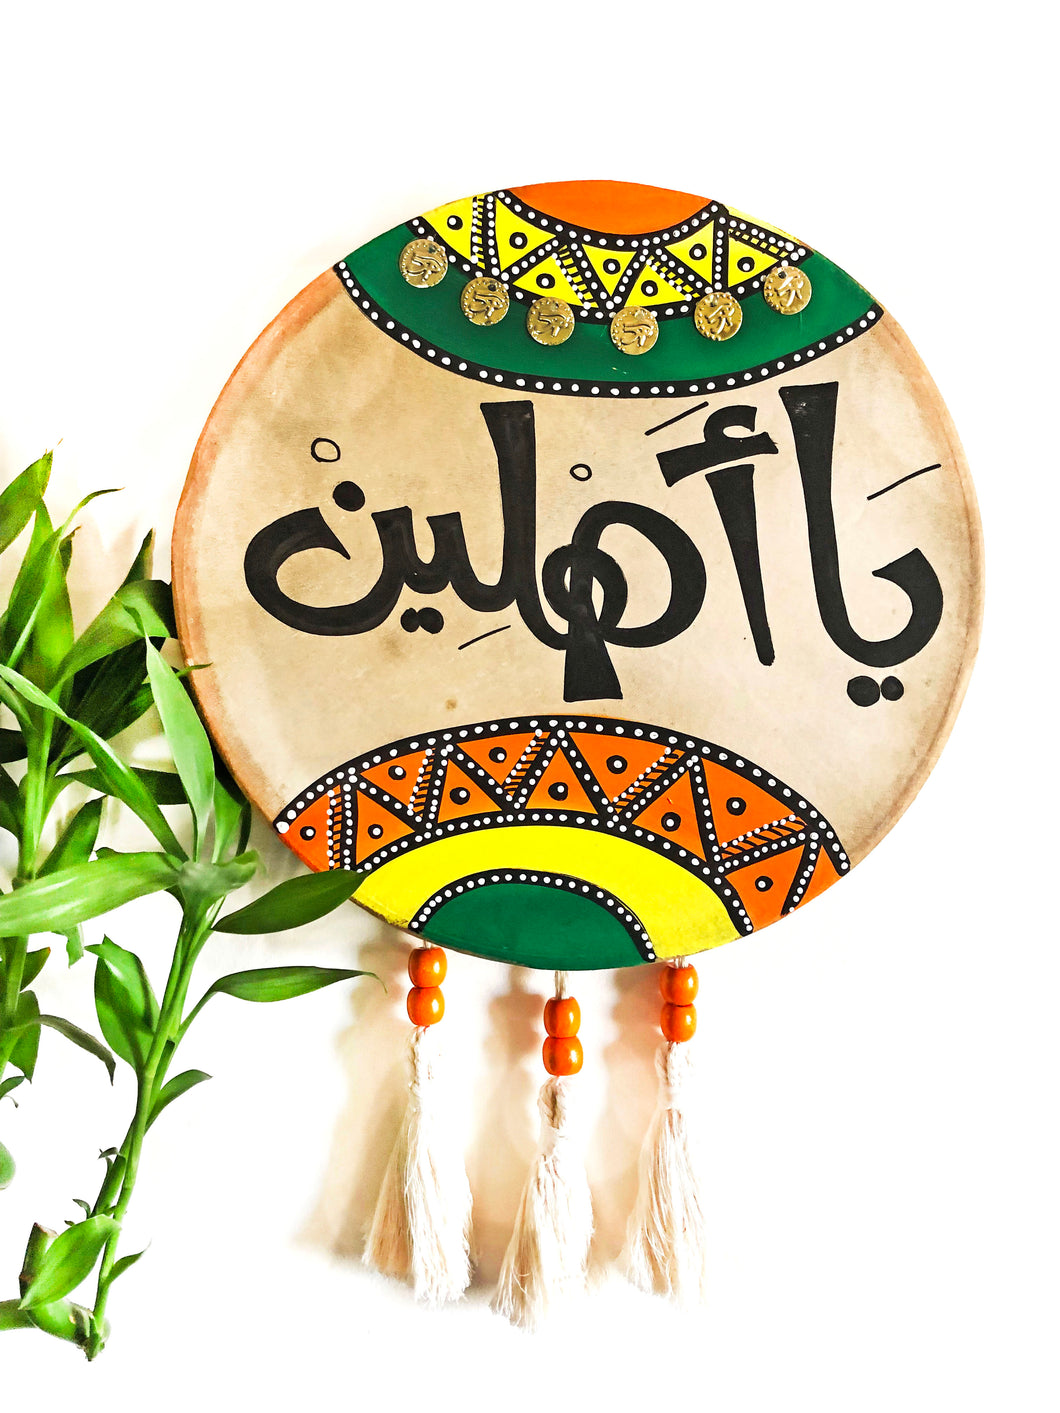 Handcrafted Leather Tambourine with Warm Welcoming Message